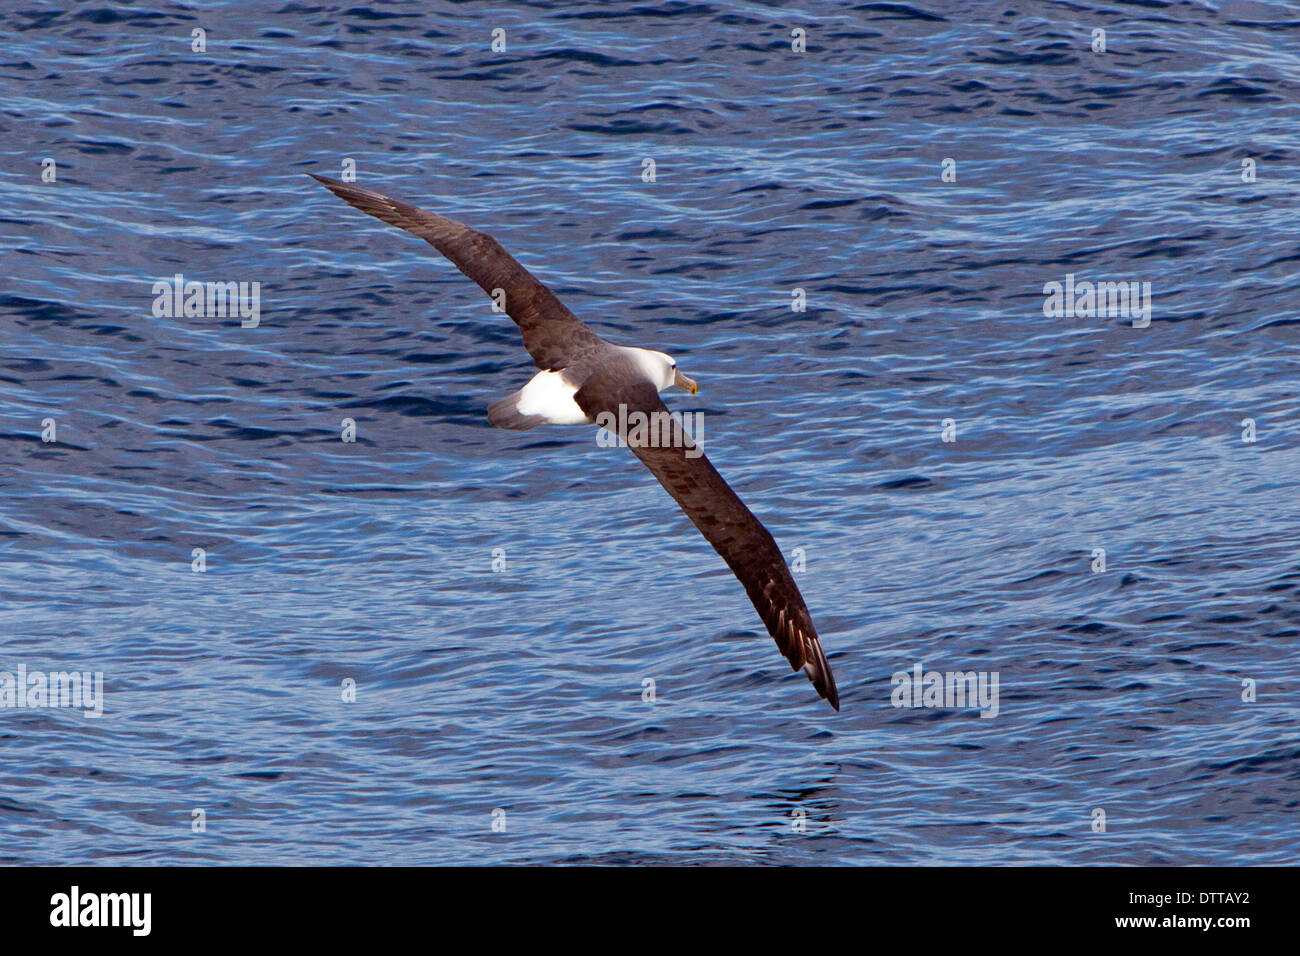 A single Black Browed Albatross (thalassarche melanophrys) over the sea, off the southern tip of South Island, New Zealand Stock Photo